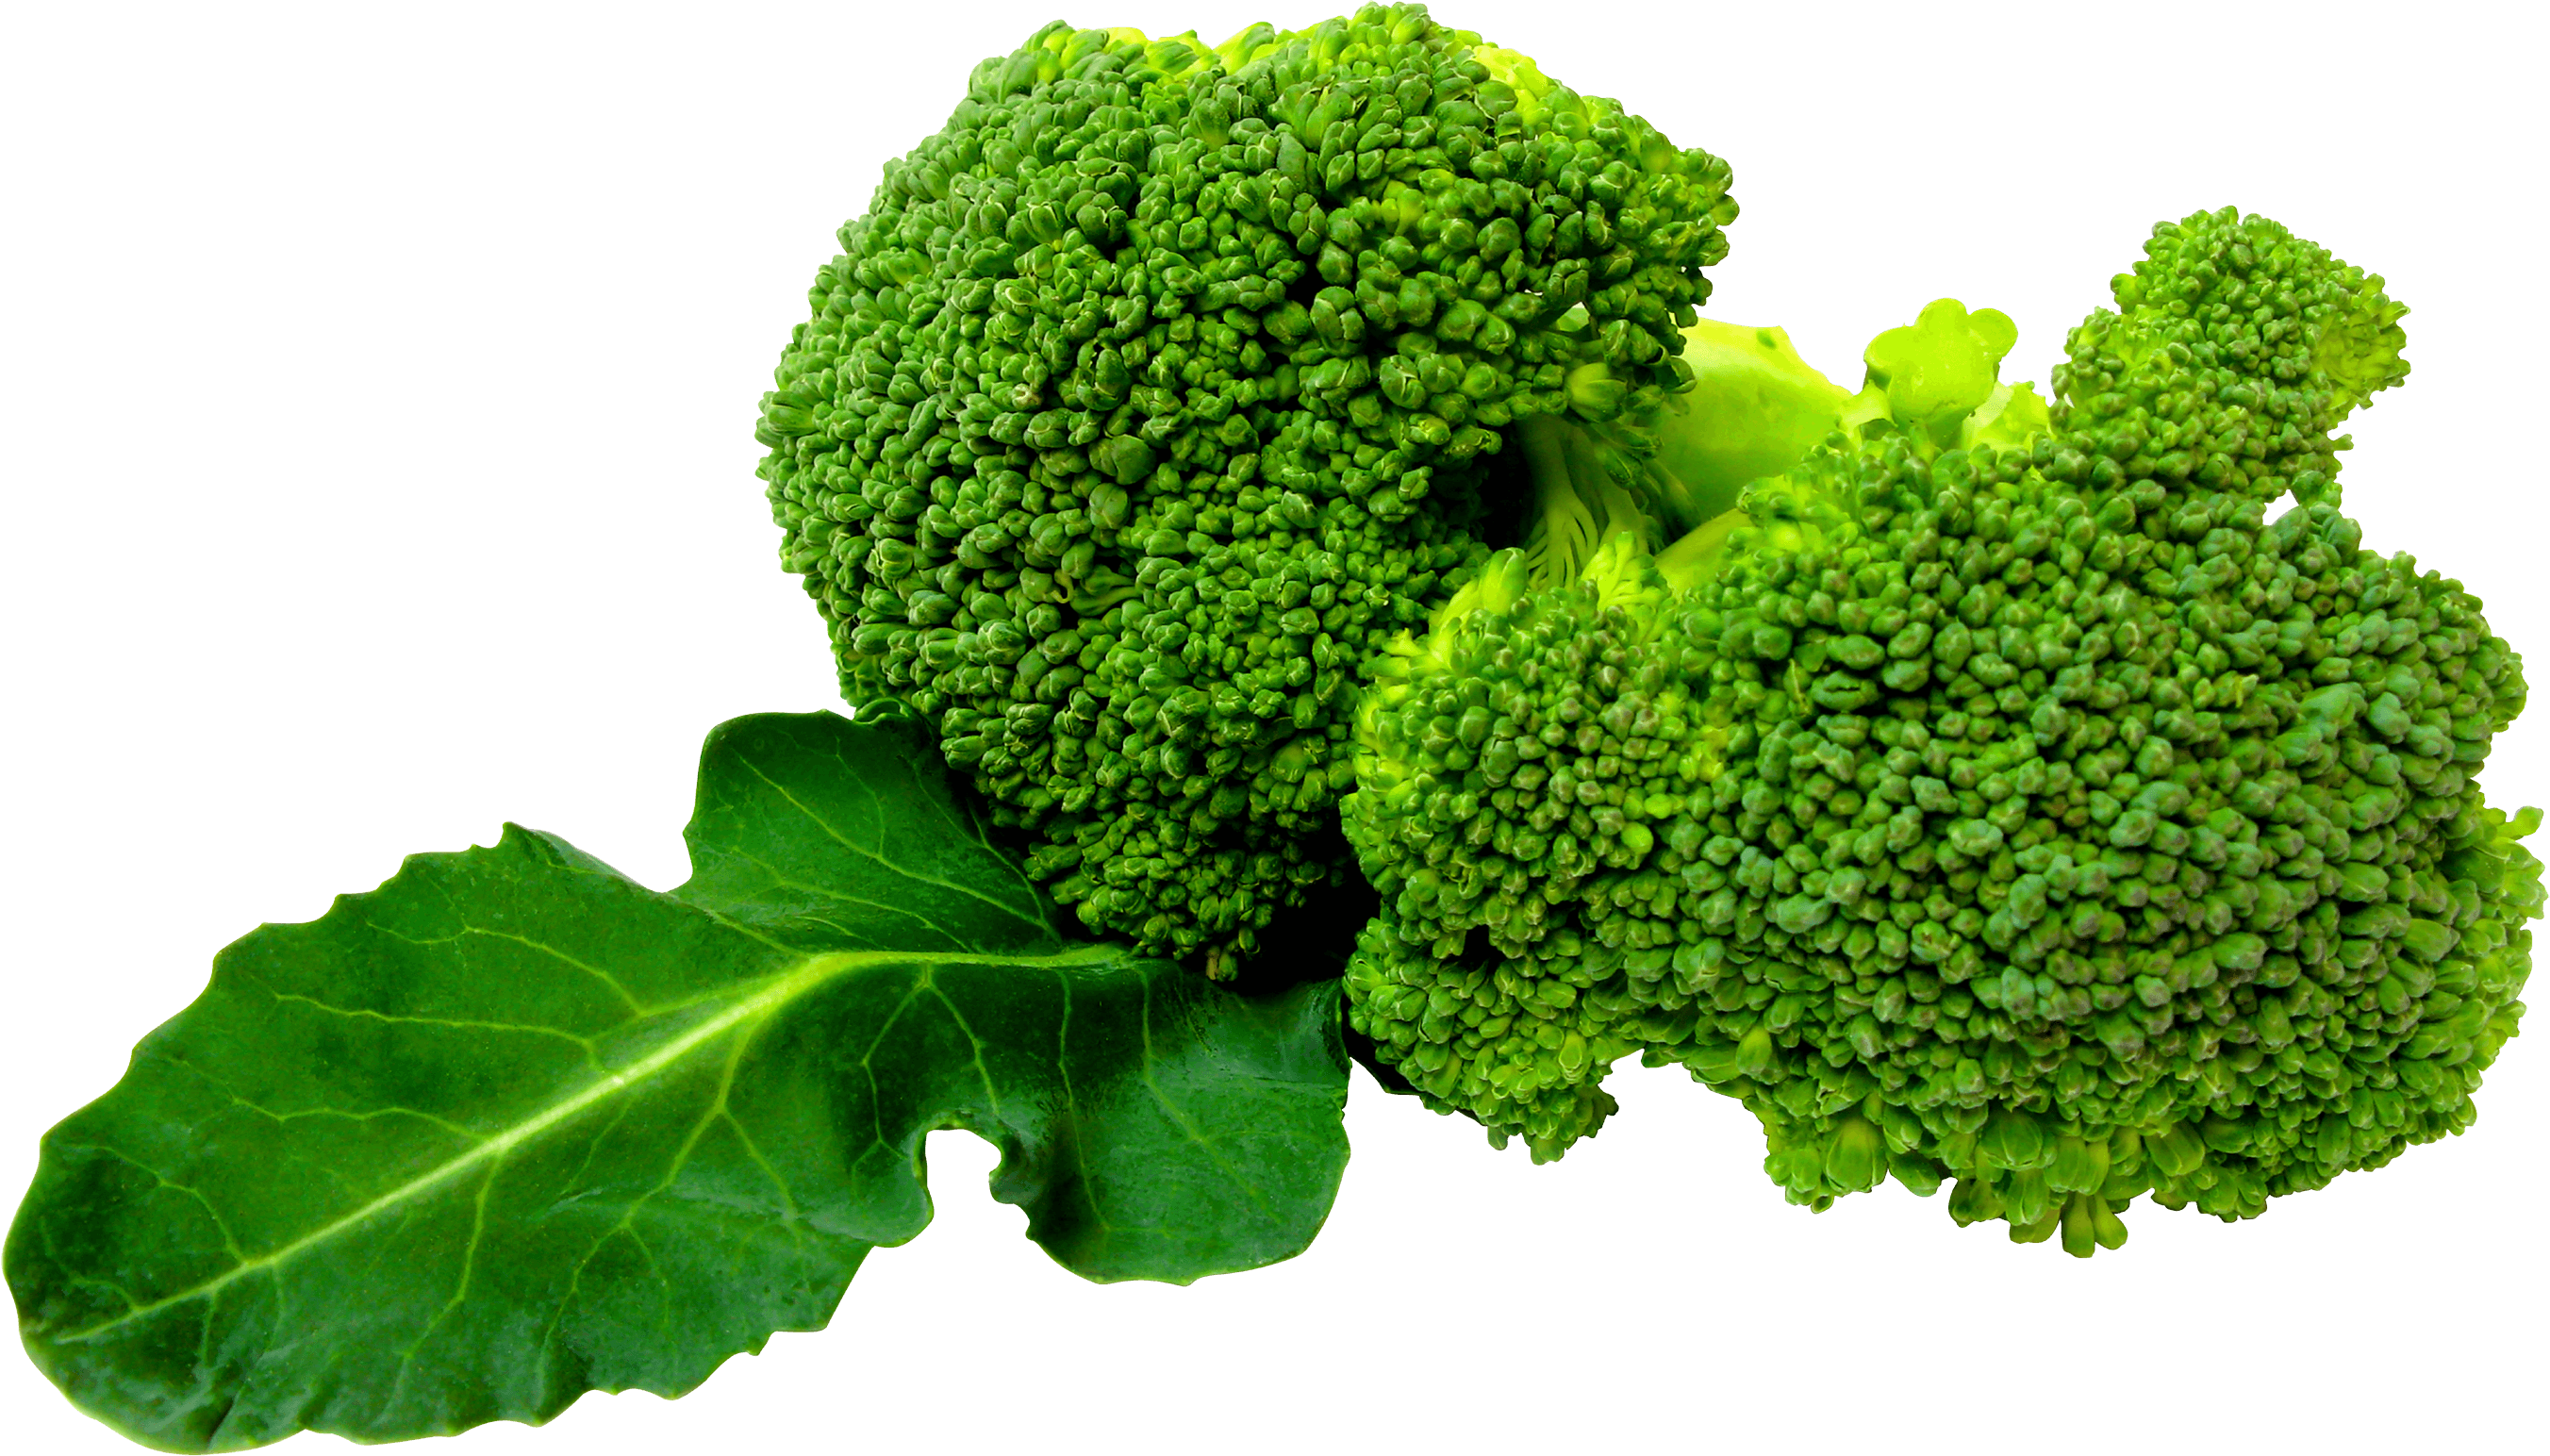 download green broccoli png image hq png image freepngimg green broccoli png image hq png image